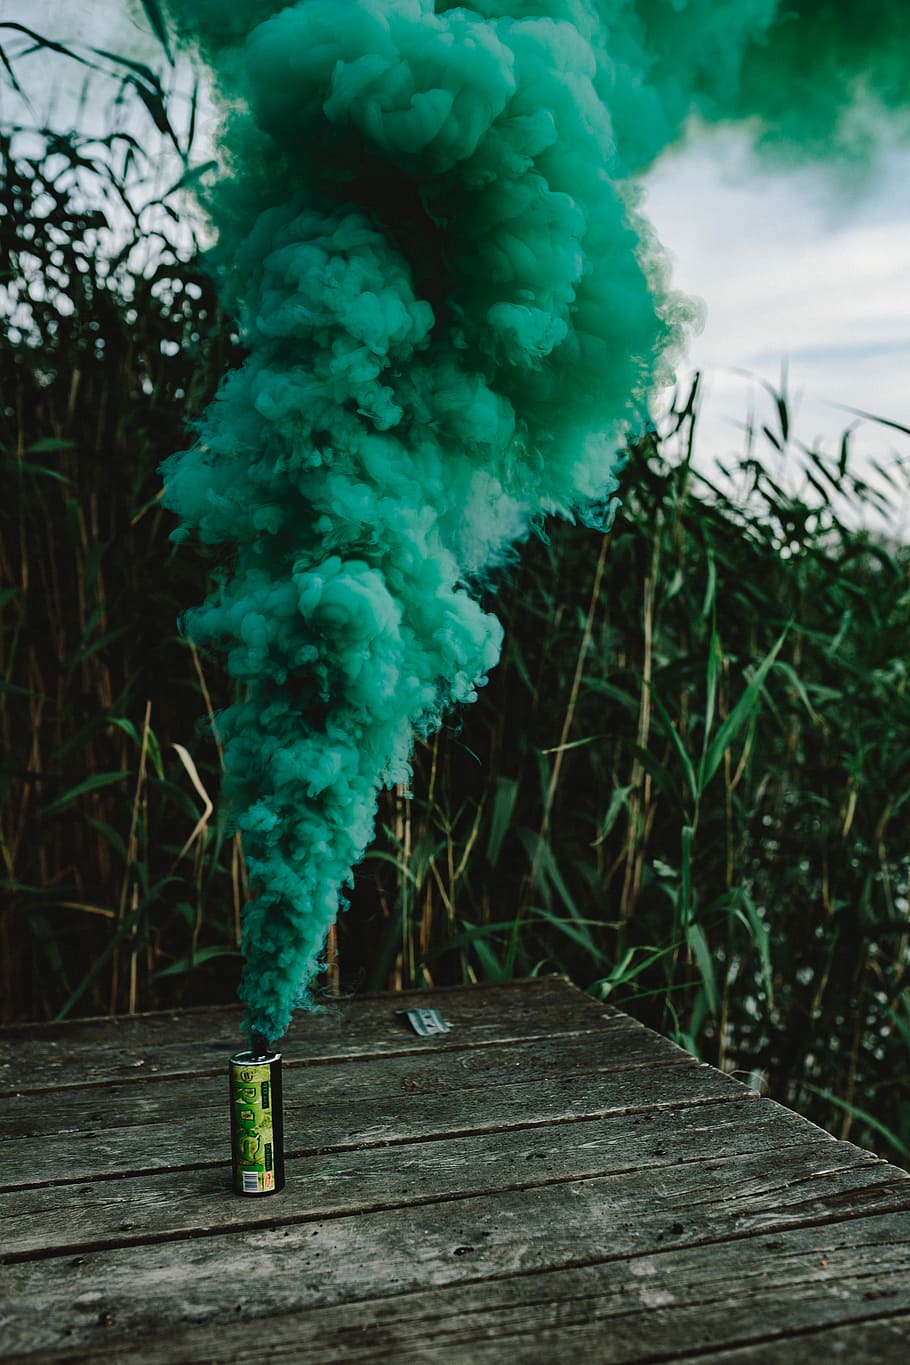 green smoke bomb, smoke bomb, abstract, background, outdoor, green smoke, green, nature, wood - Material, green color